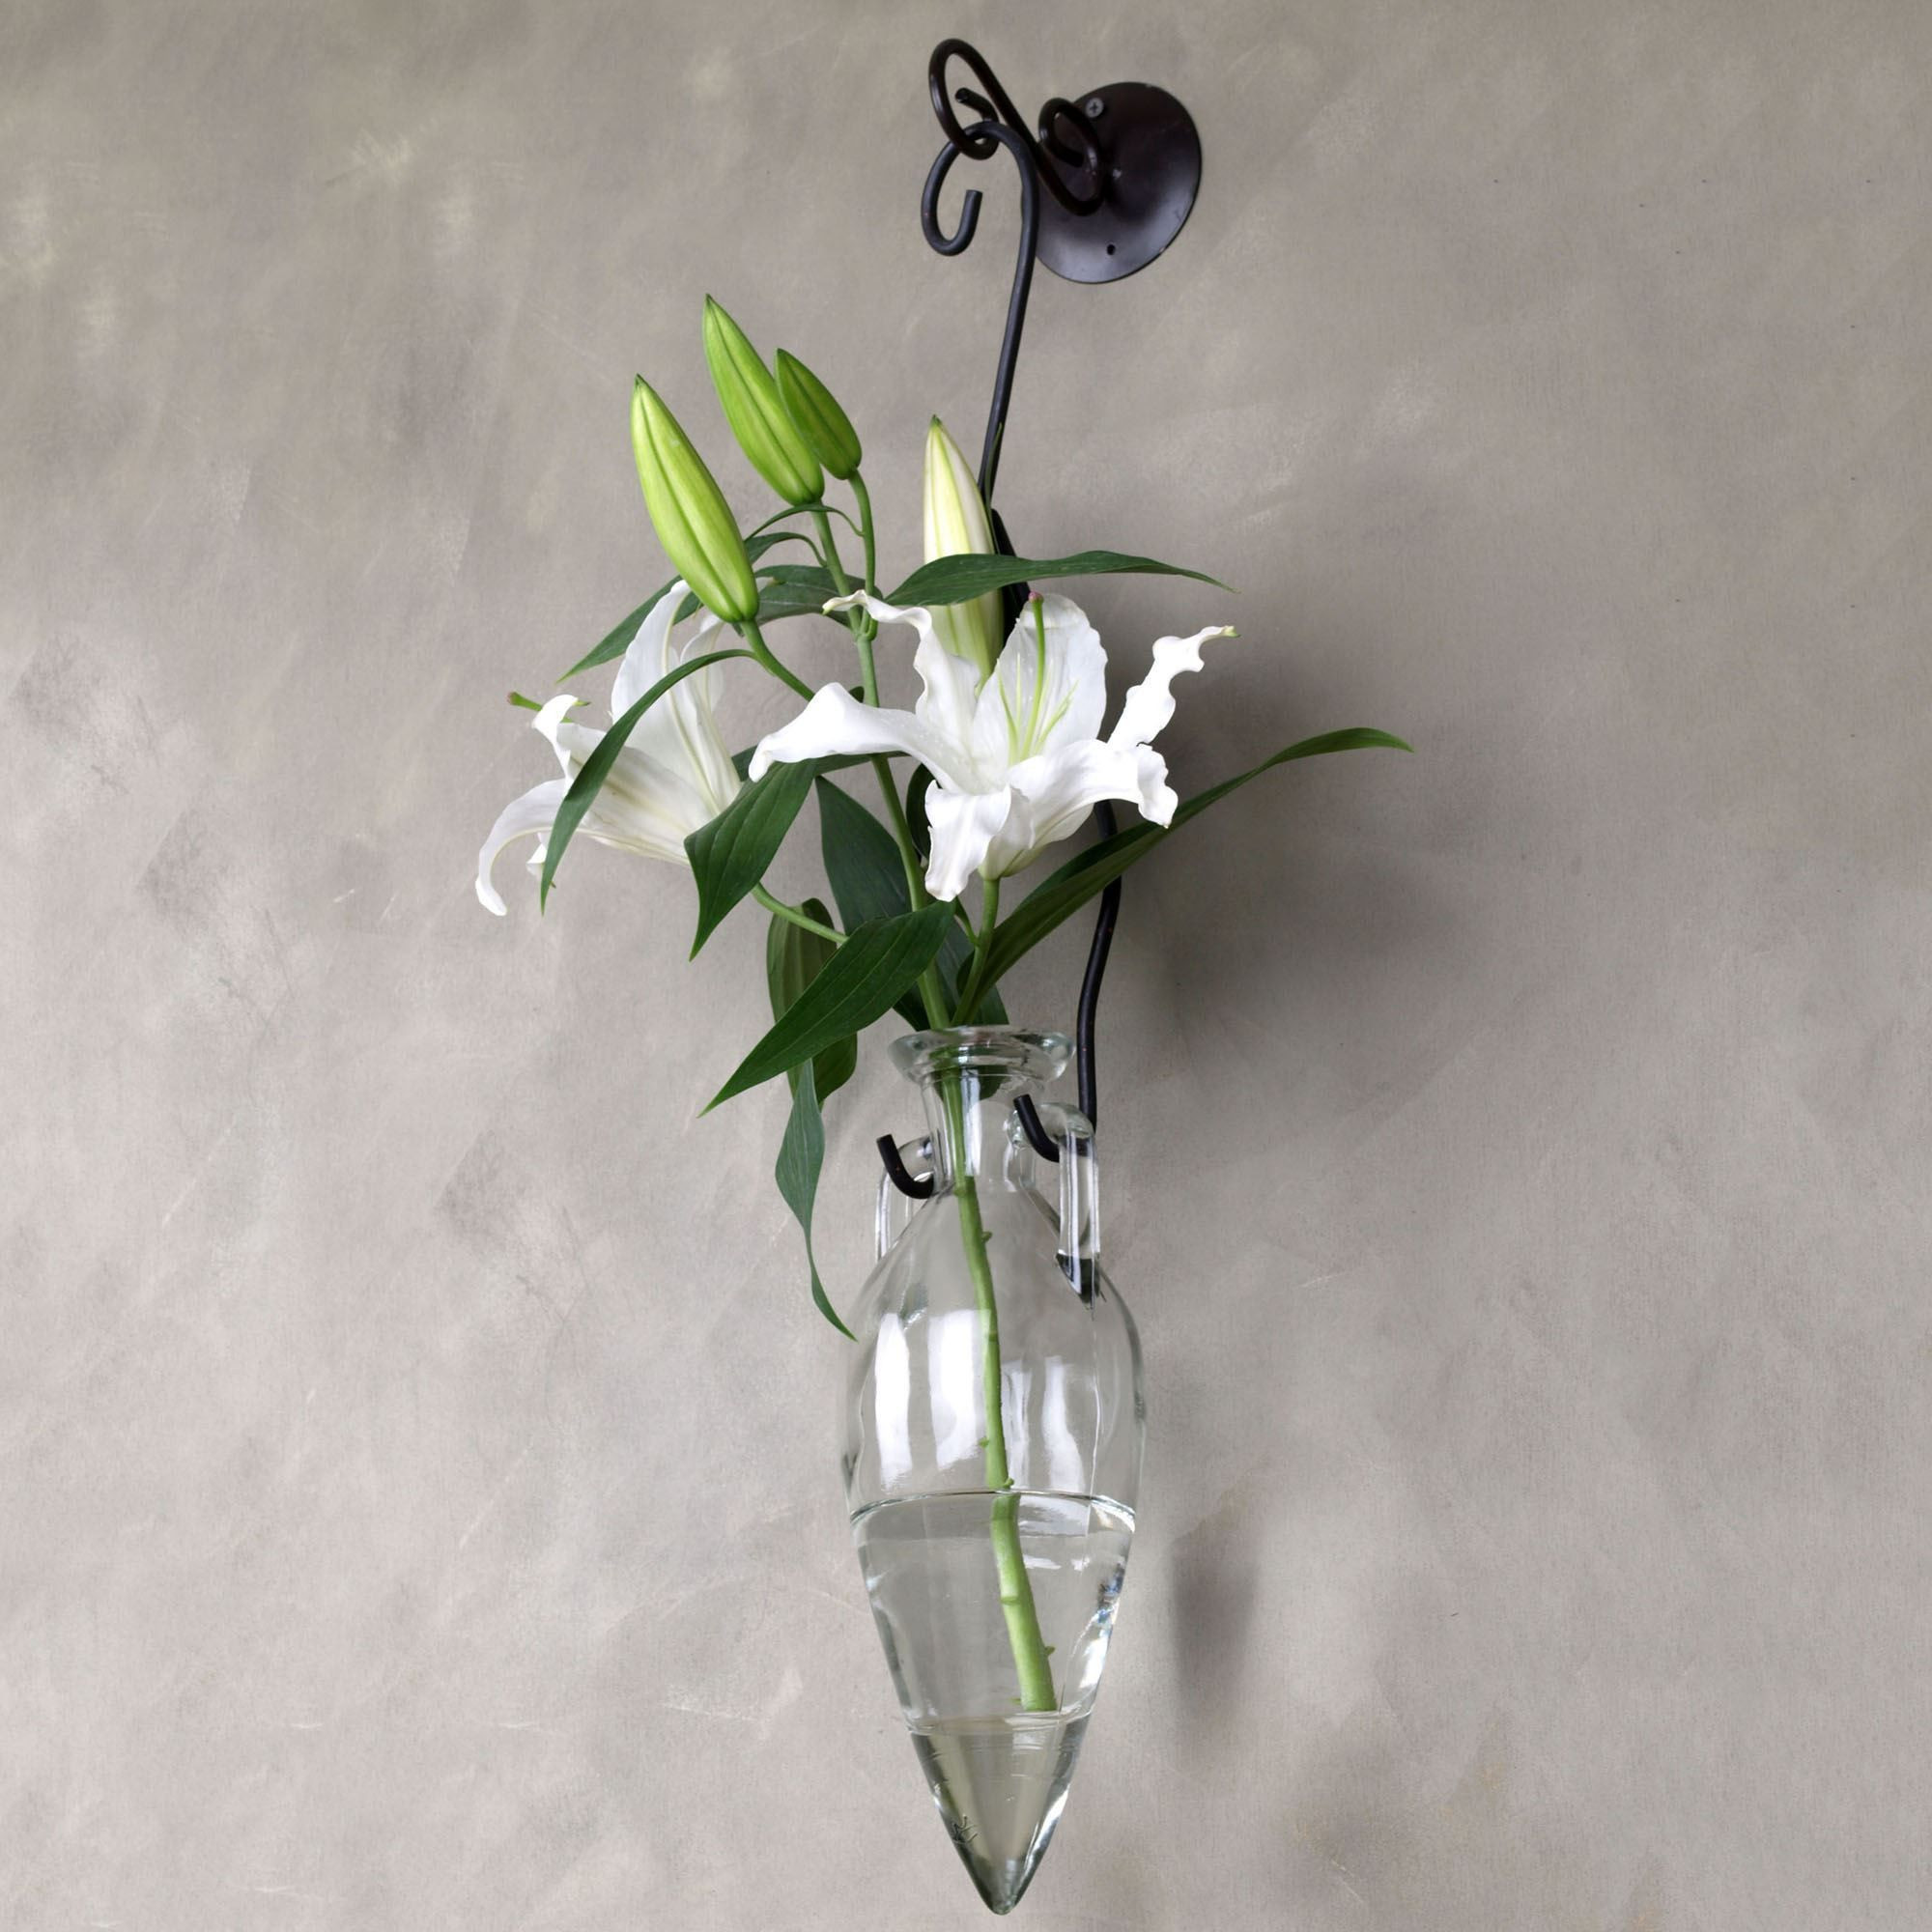 10 Ideal Silver Bowl Vase 2024 free download silver bowl vase of 30 copper flower vase the weekly world with 33 inspirational silver vase decor